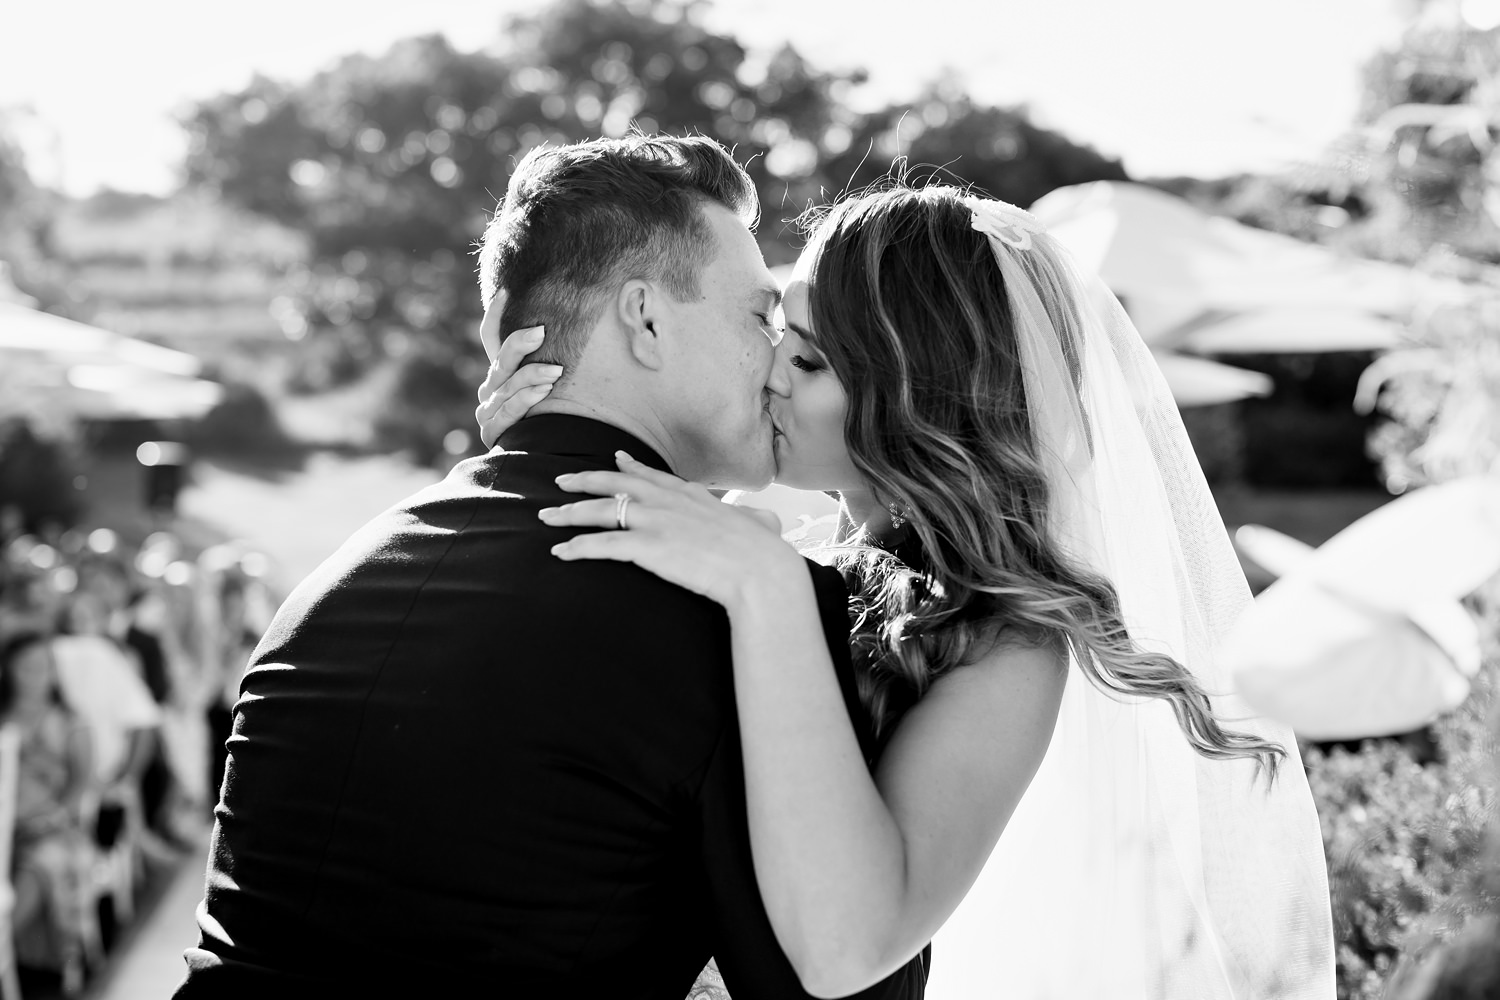 The most beautiful and romantic black and white first kiss wedding photograph by South African wedding photographer Niki M